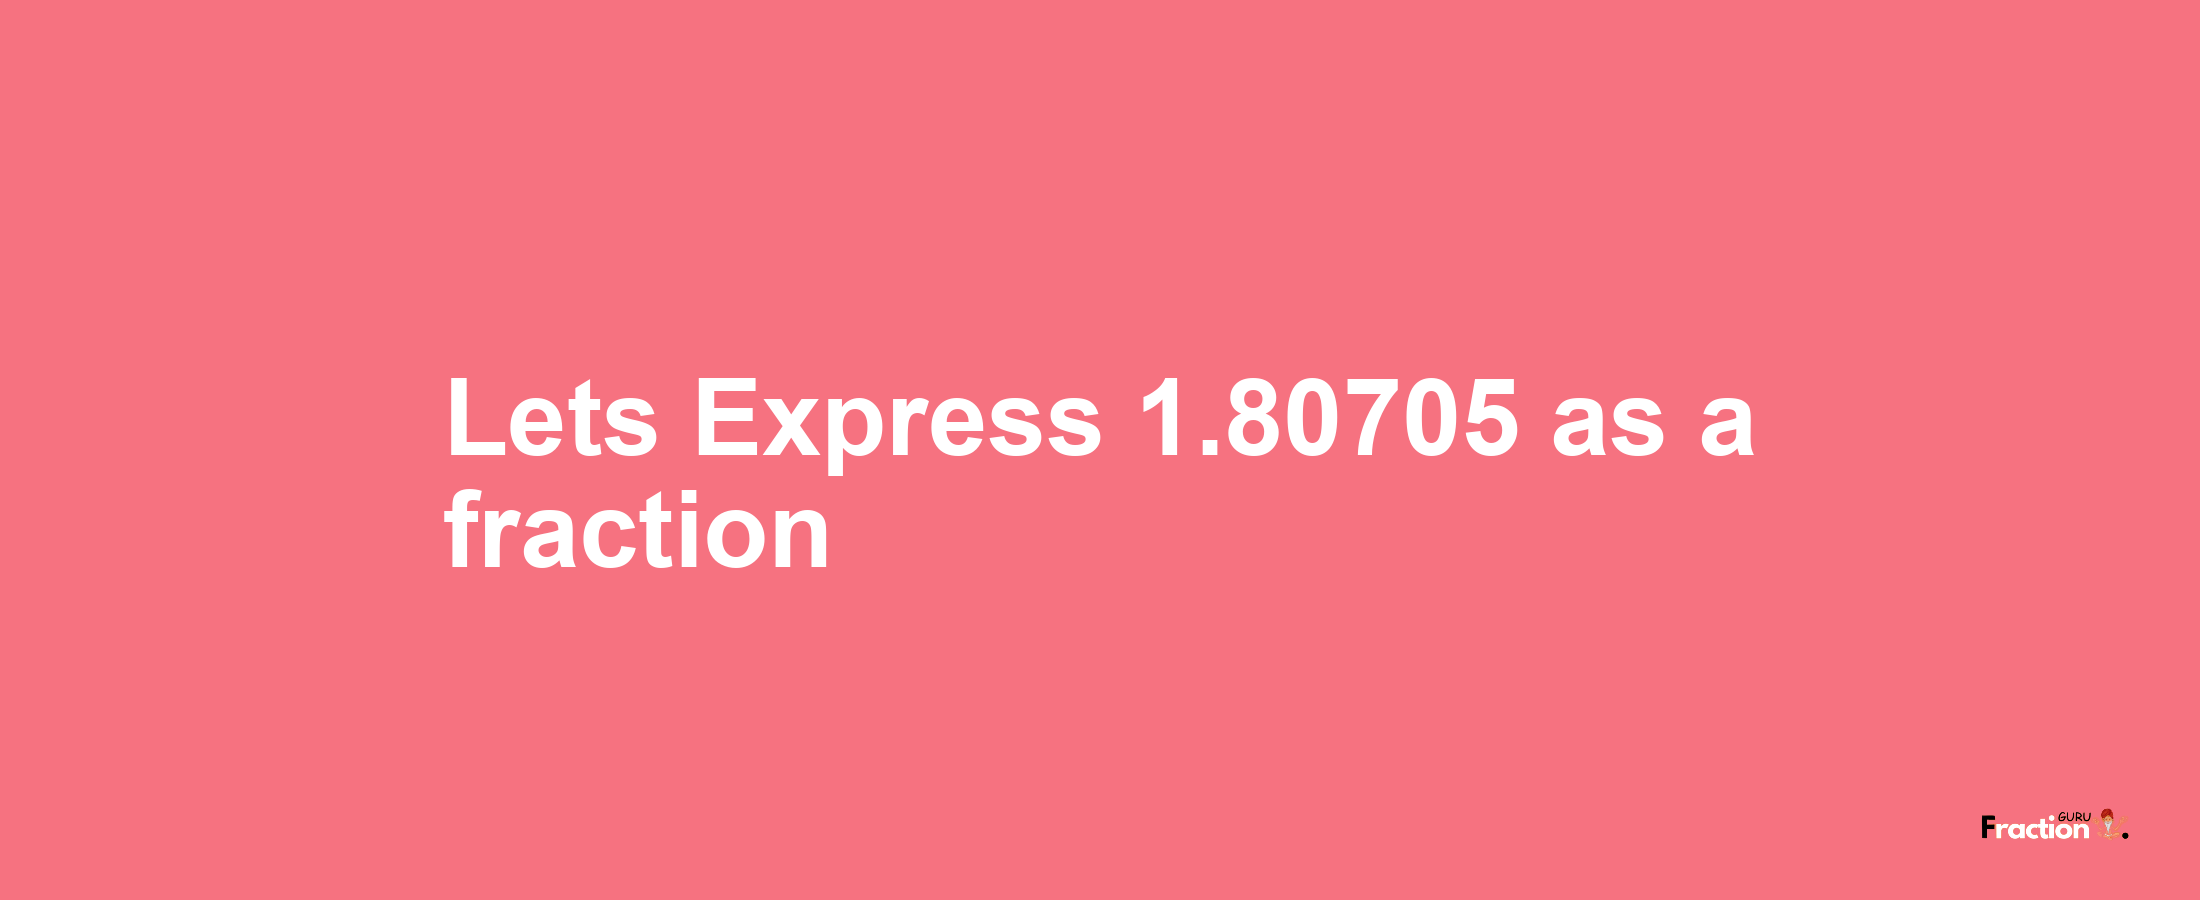 Lets Express 1.80705 as afraction